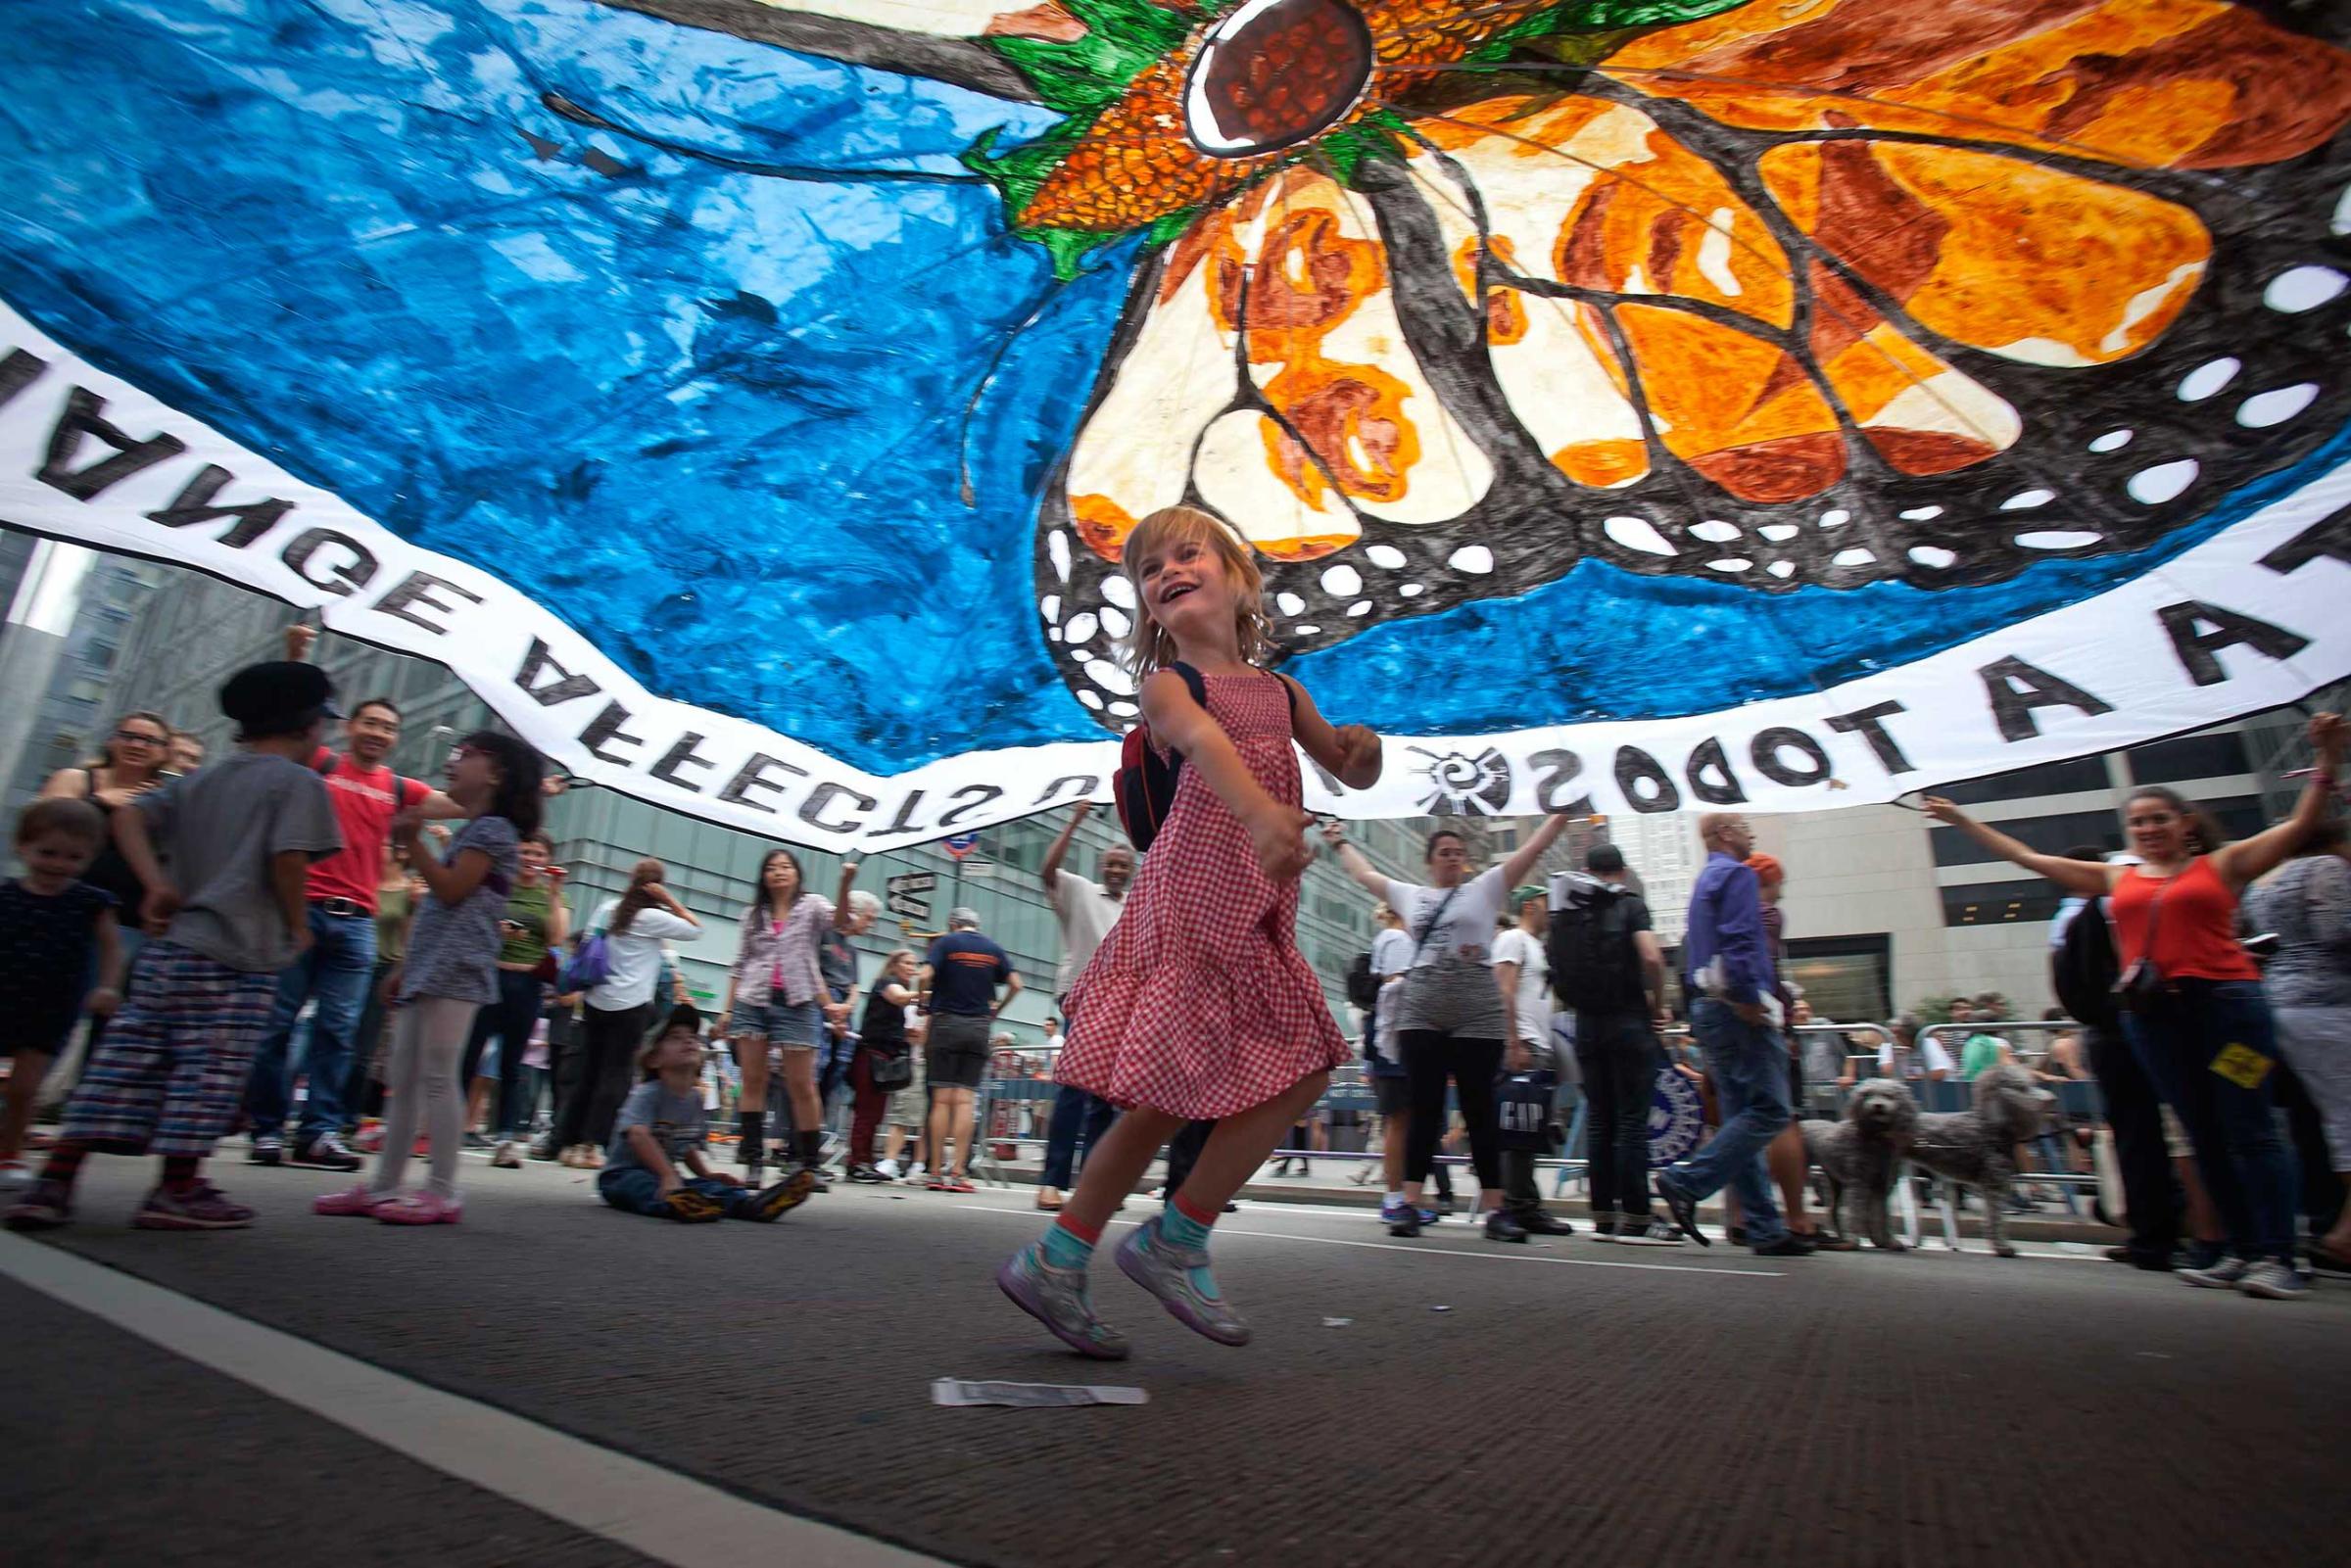 A girl dances under a protest parachute as people take part in the "People's Climate March" down 6th Ave. in the Manhattan borough of New York